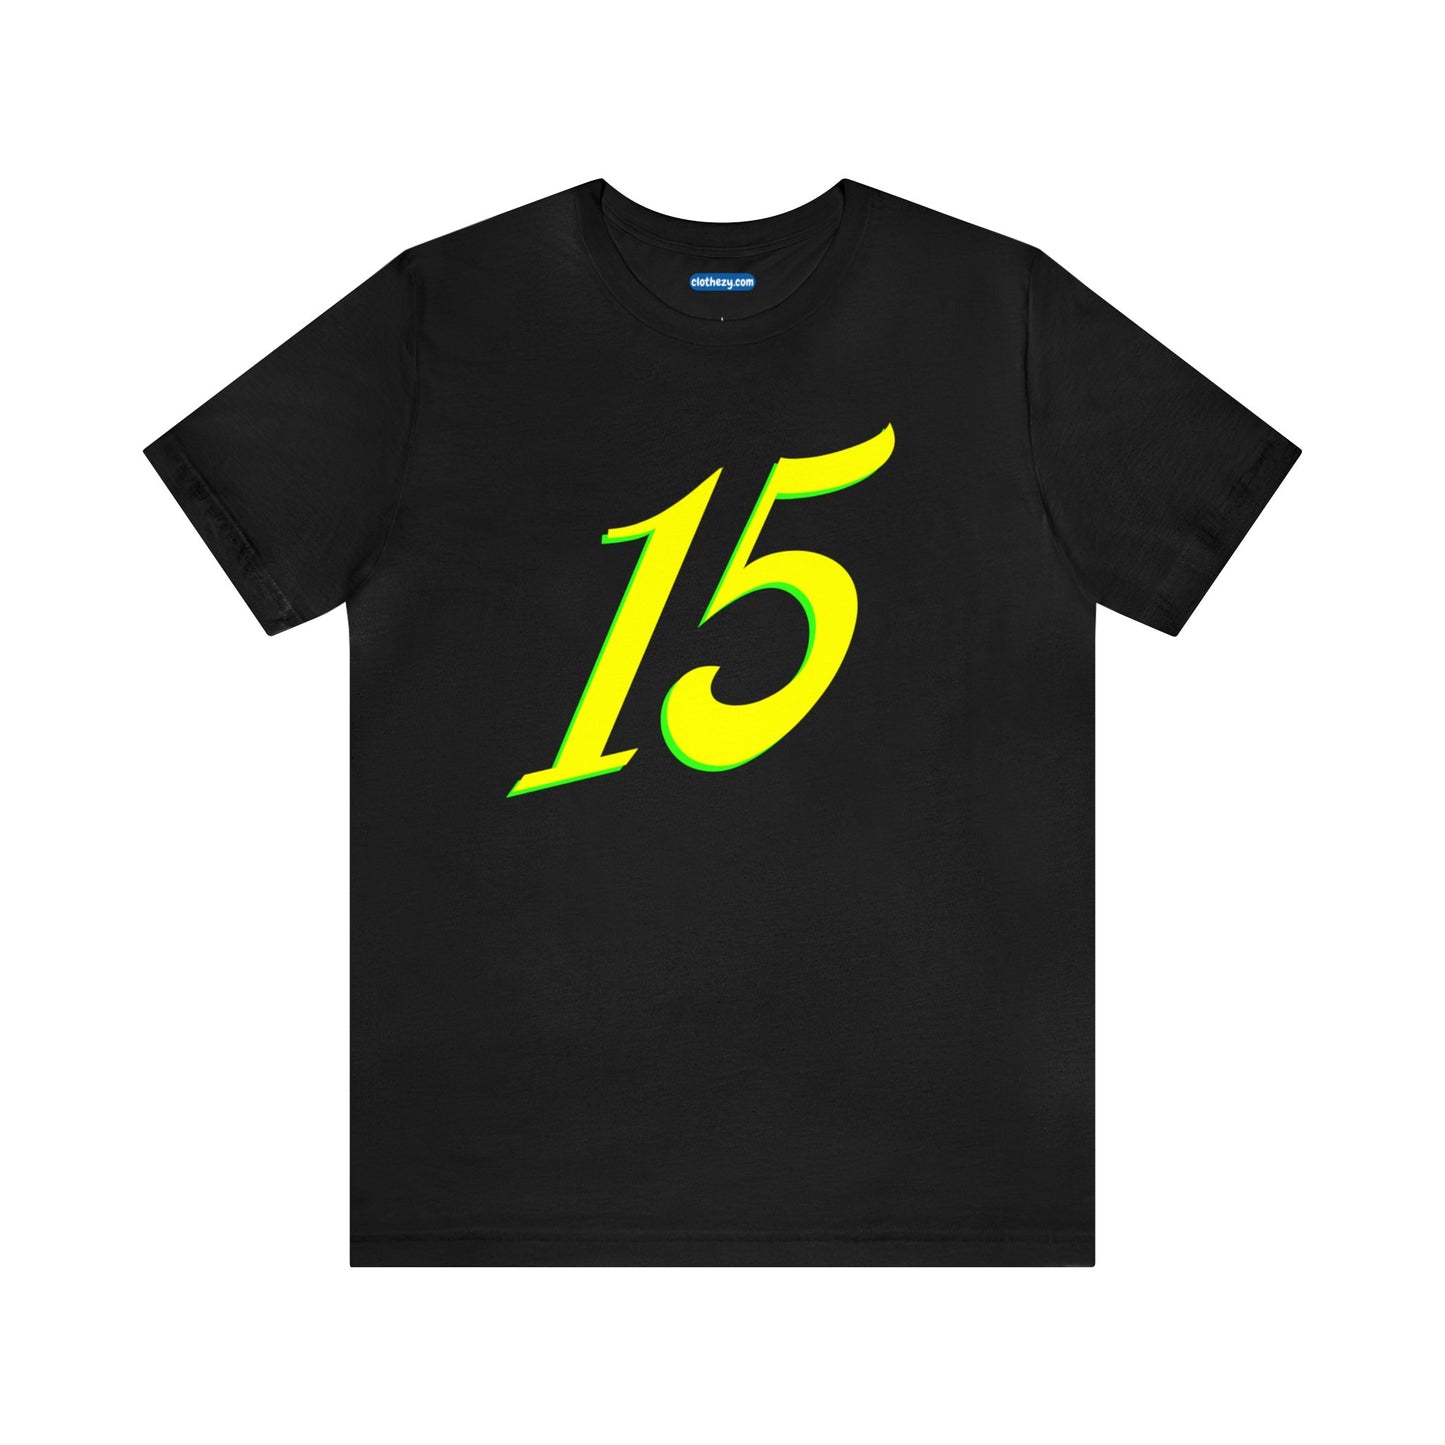 Number 15 Design - Soft Cotton Tee for birthdays and celebrations, Gift for friends and family, Multiple Options by clothezy.com in Dark Grey Heather Size Small - Buy Now